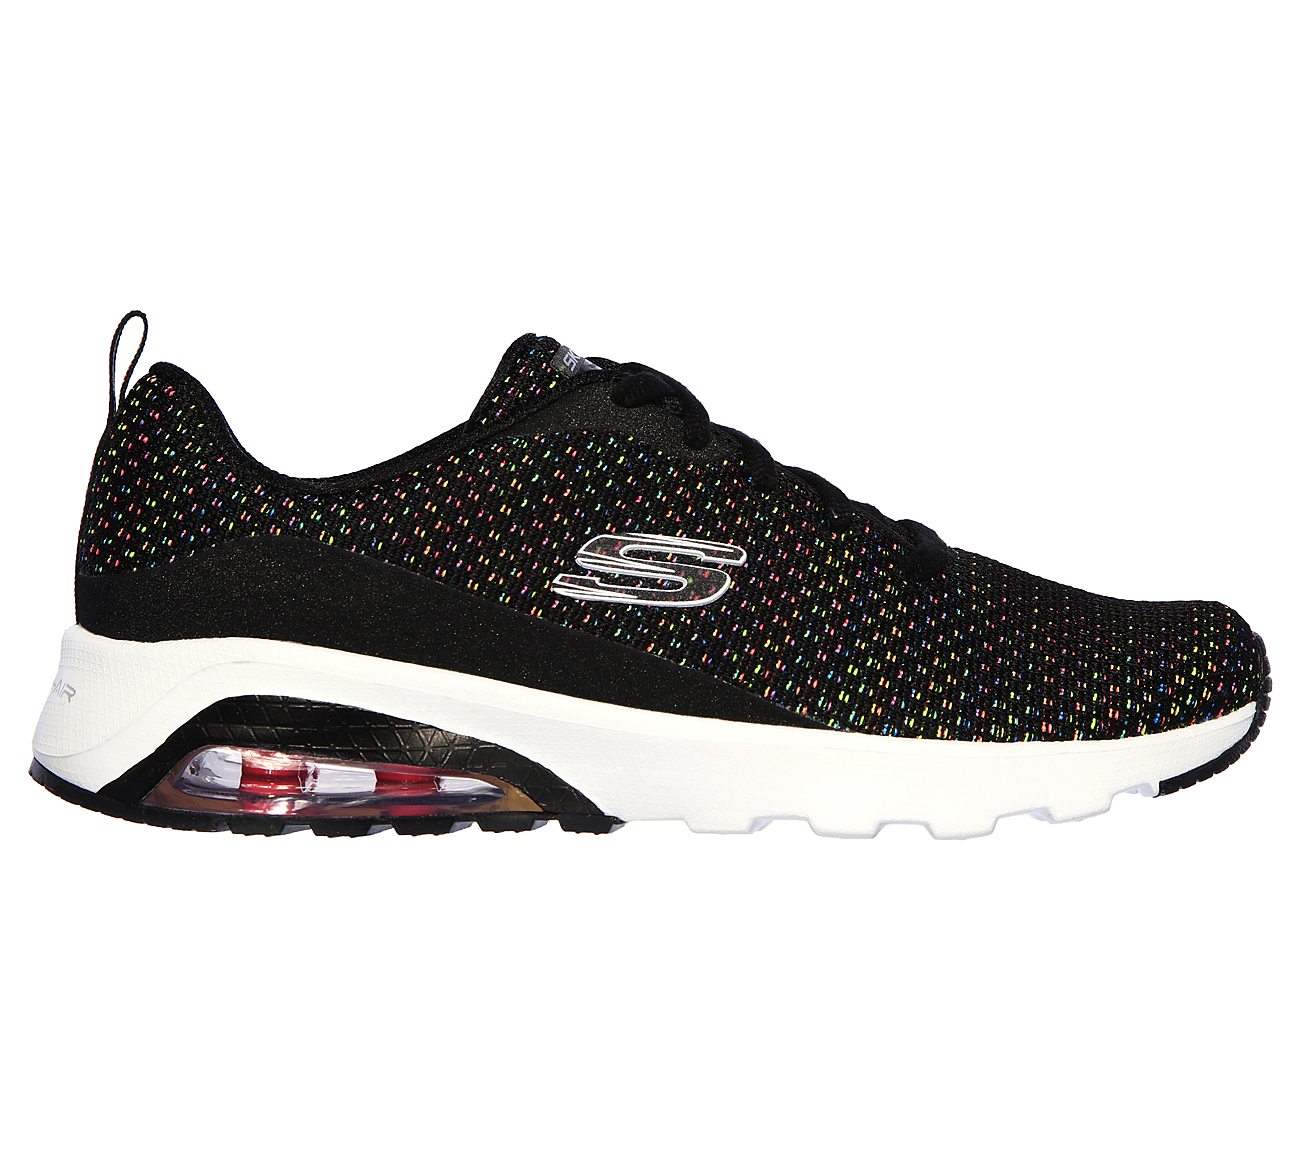 skechers skech air extreme walkout